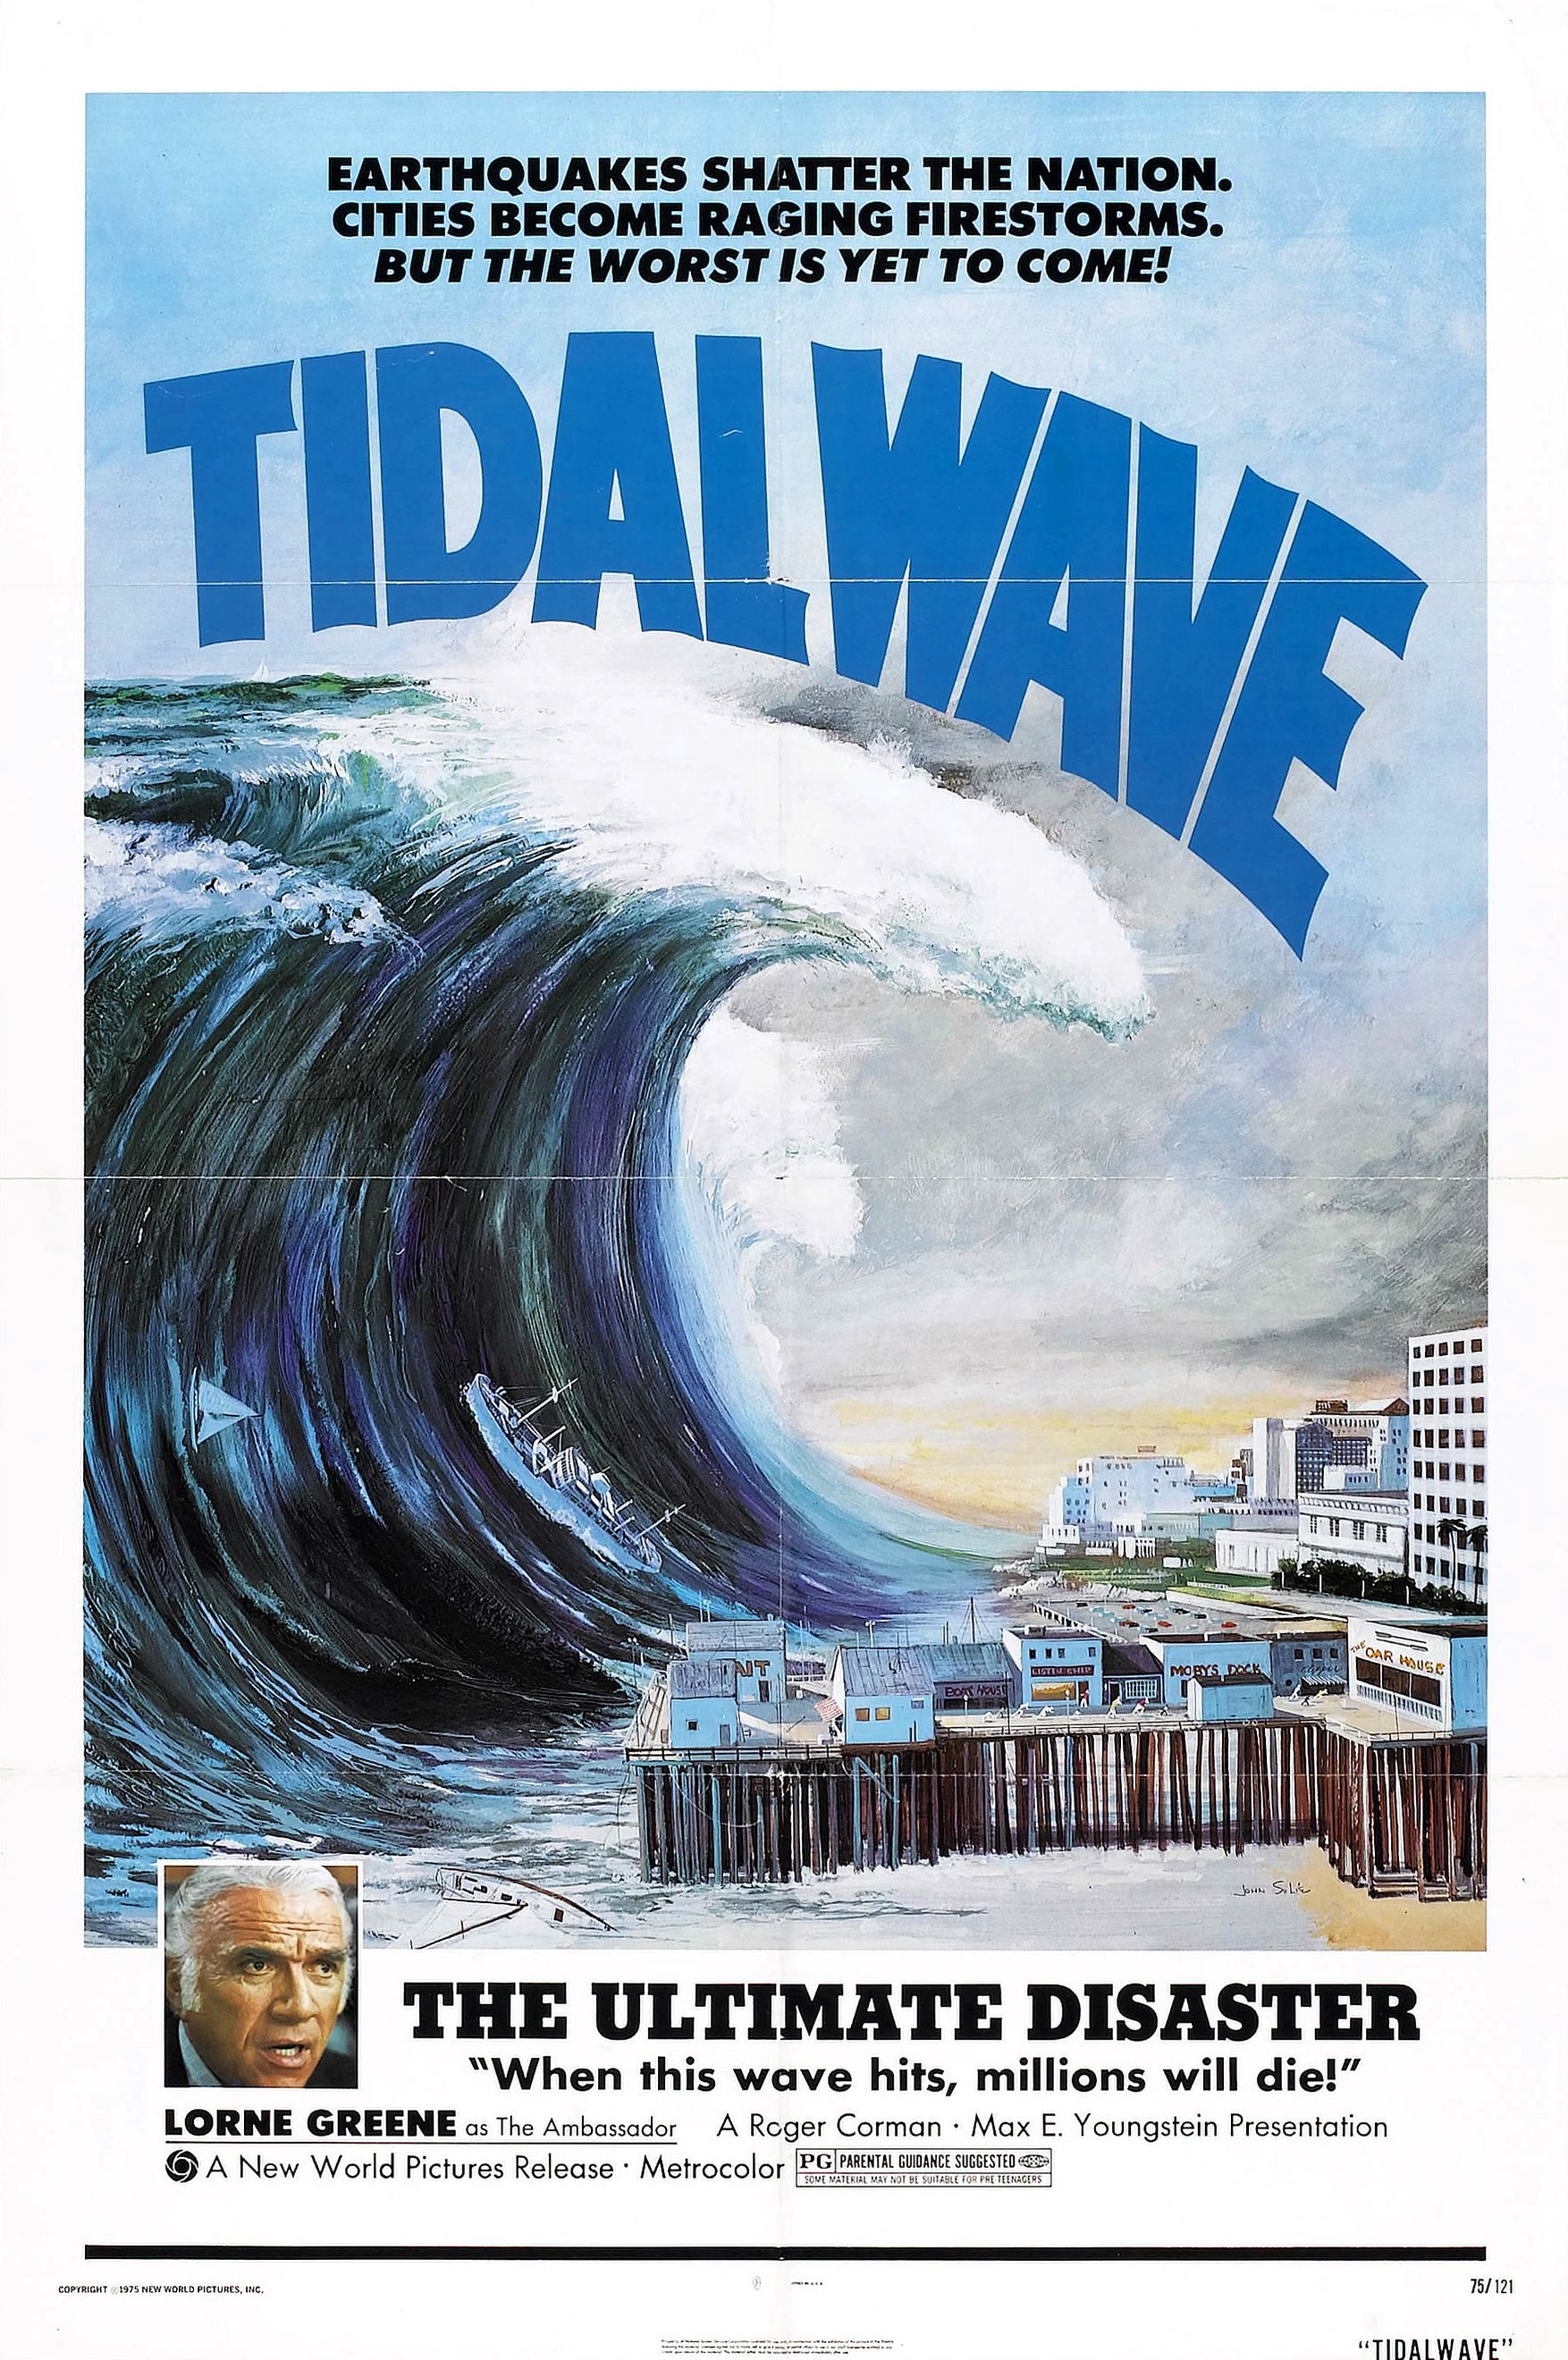 tidal wave movie poster - Earthquakes Shatter The Nation Cities Become Raging Firestorms. But The Worst Is Yet To Come! Tidalwaves The Ultimate Disaster "When this wave hits, millions will die!" Lorne Greene... A Roger ComonMox L. Youngstein Presentation 